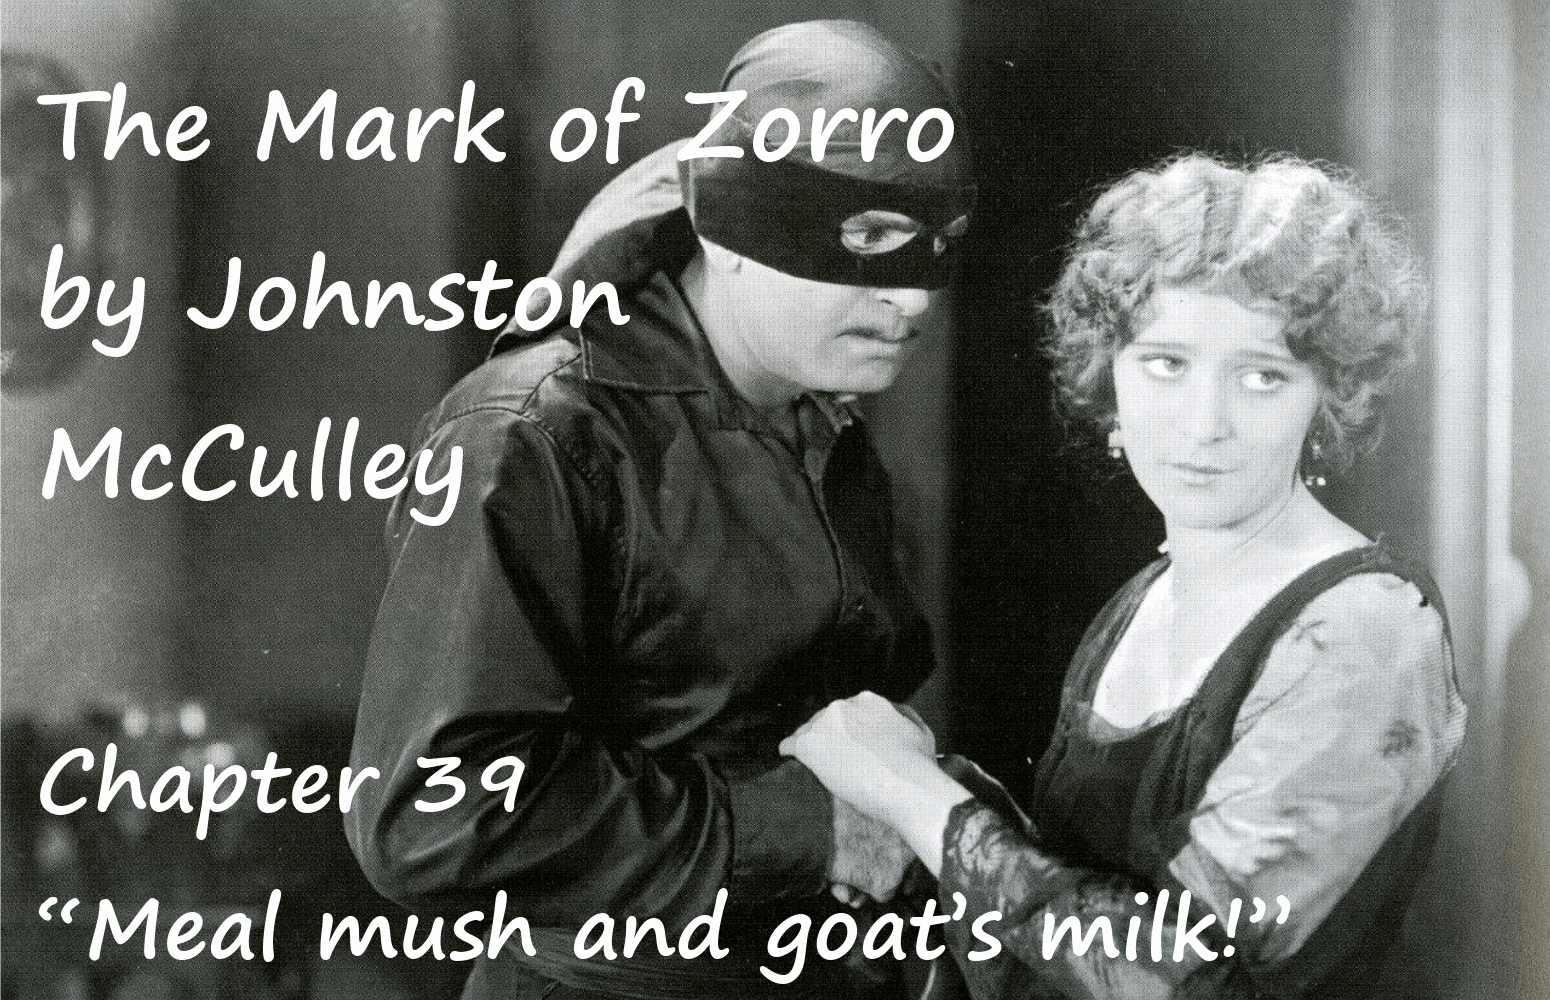 The Mark of Zorro chapter 39 “Meal mush and goat’s milk!” by Johnston McCulley